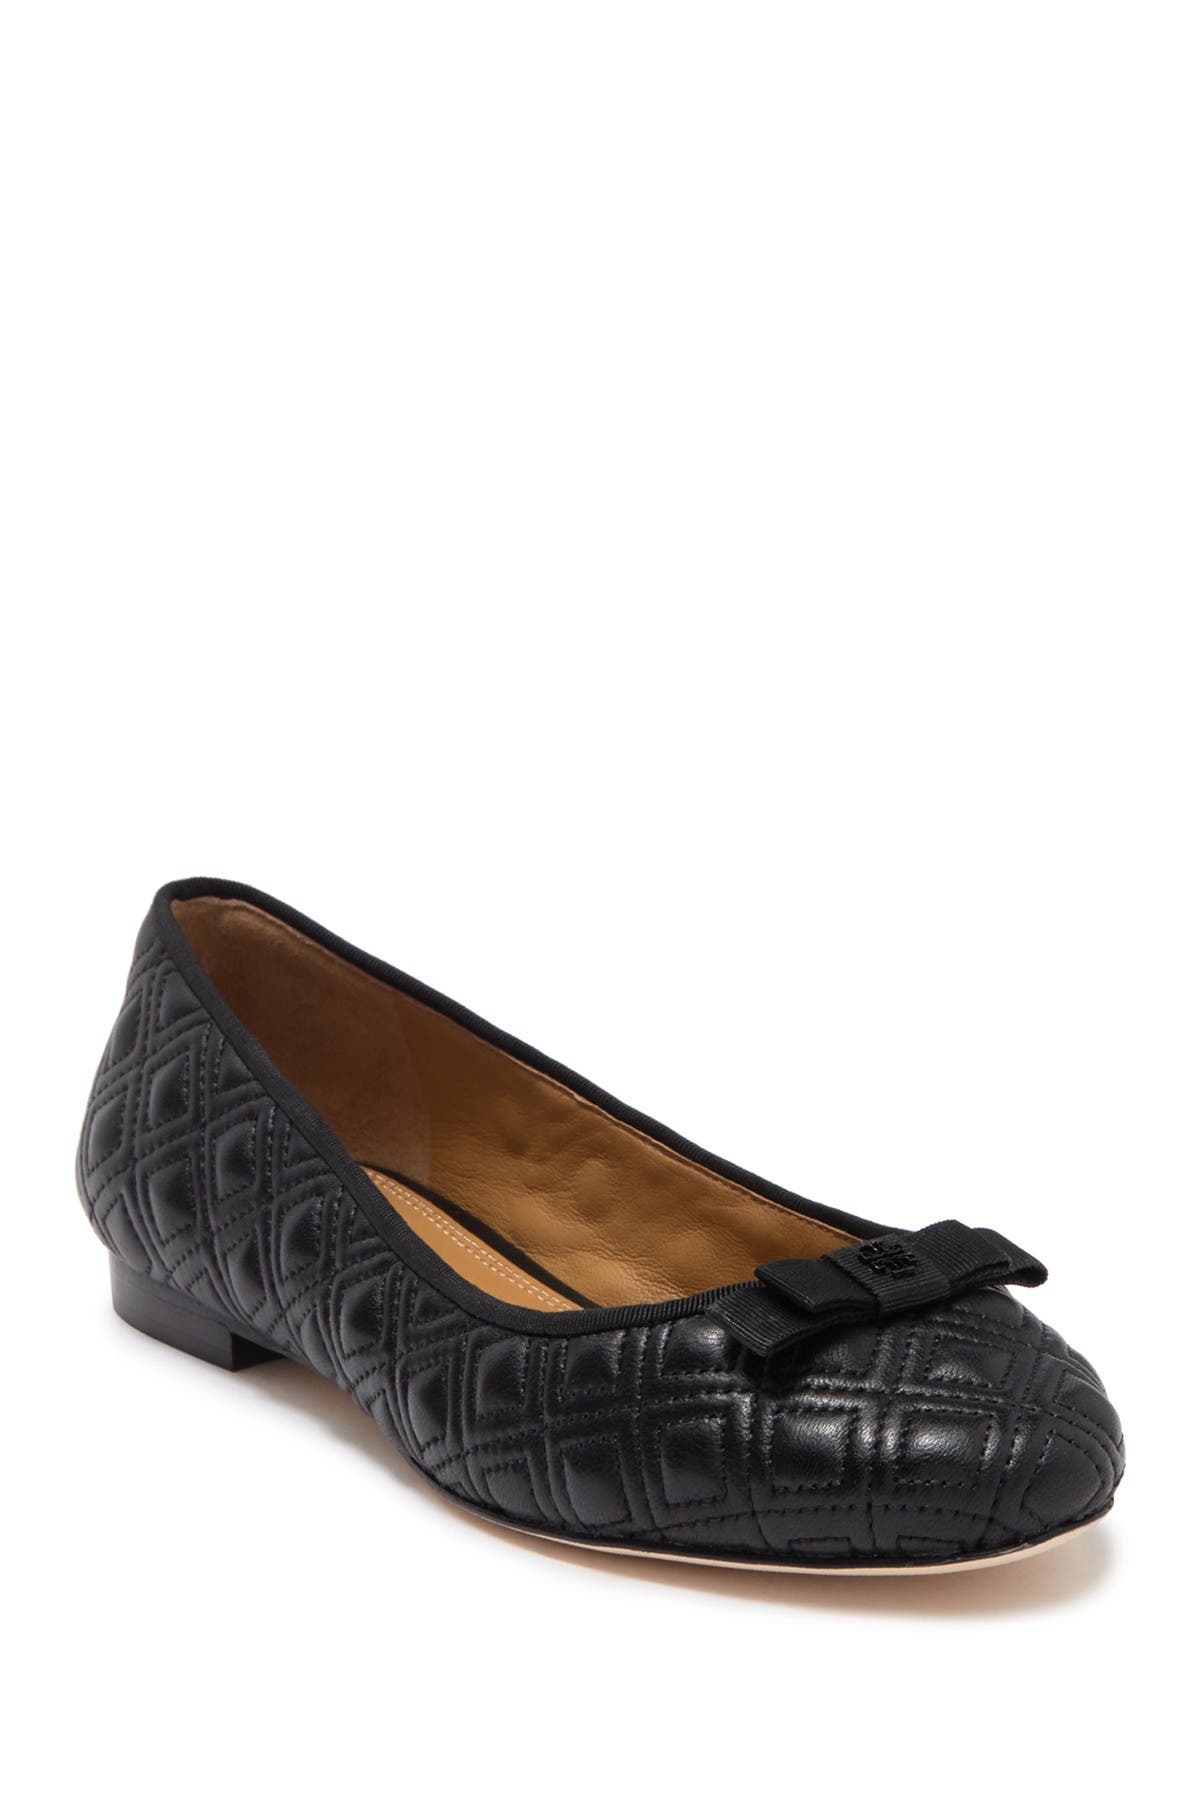 quilted leather flats